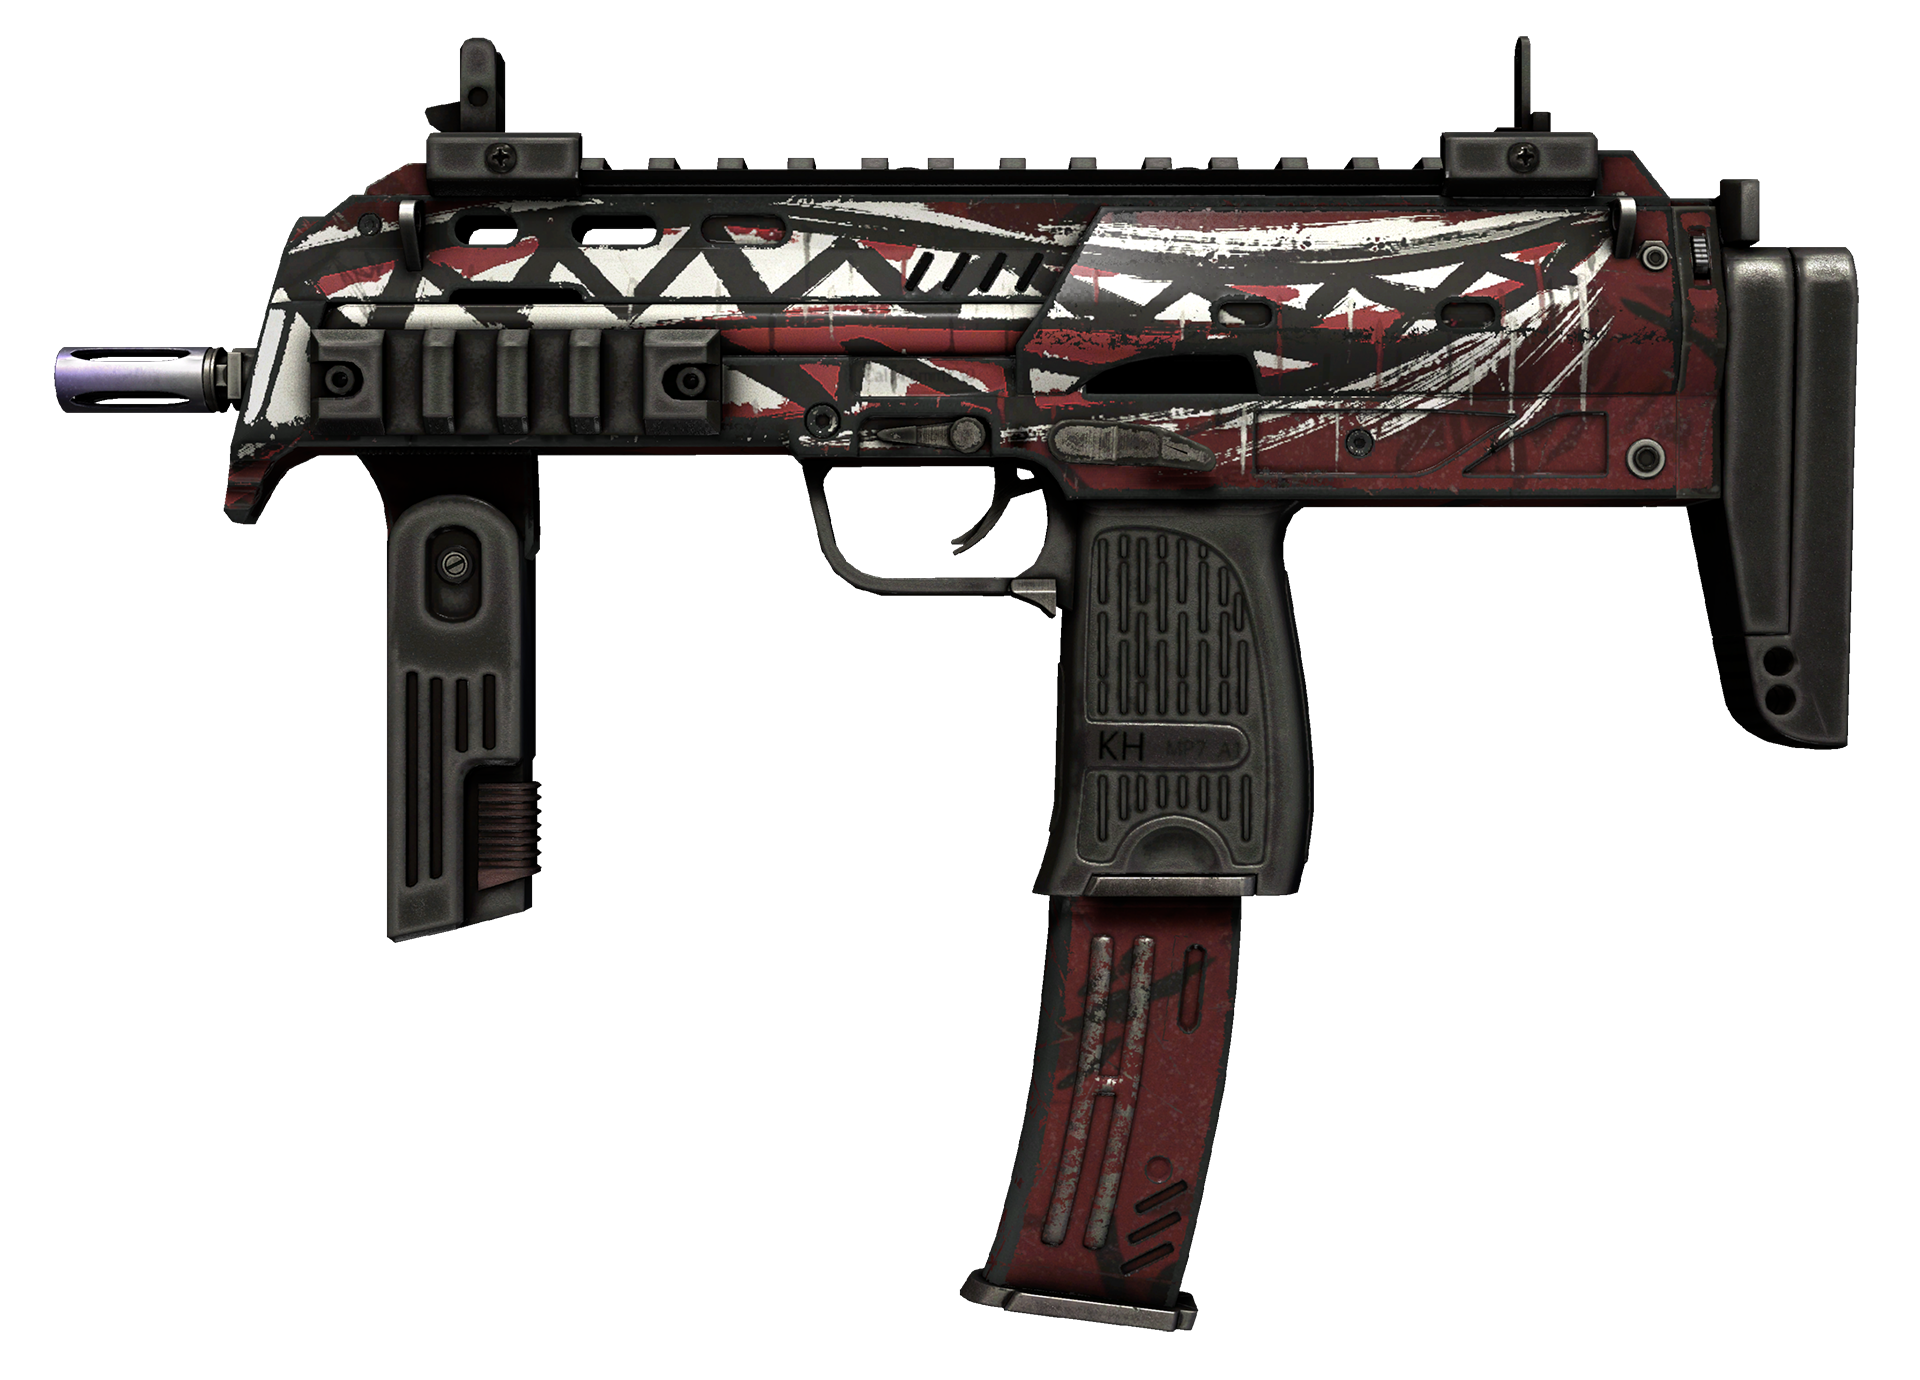 MP7 Motherboard cs go skin download the new version for android